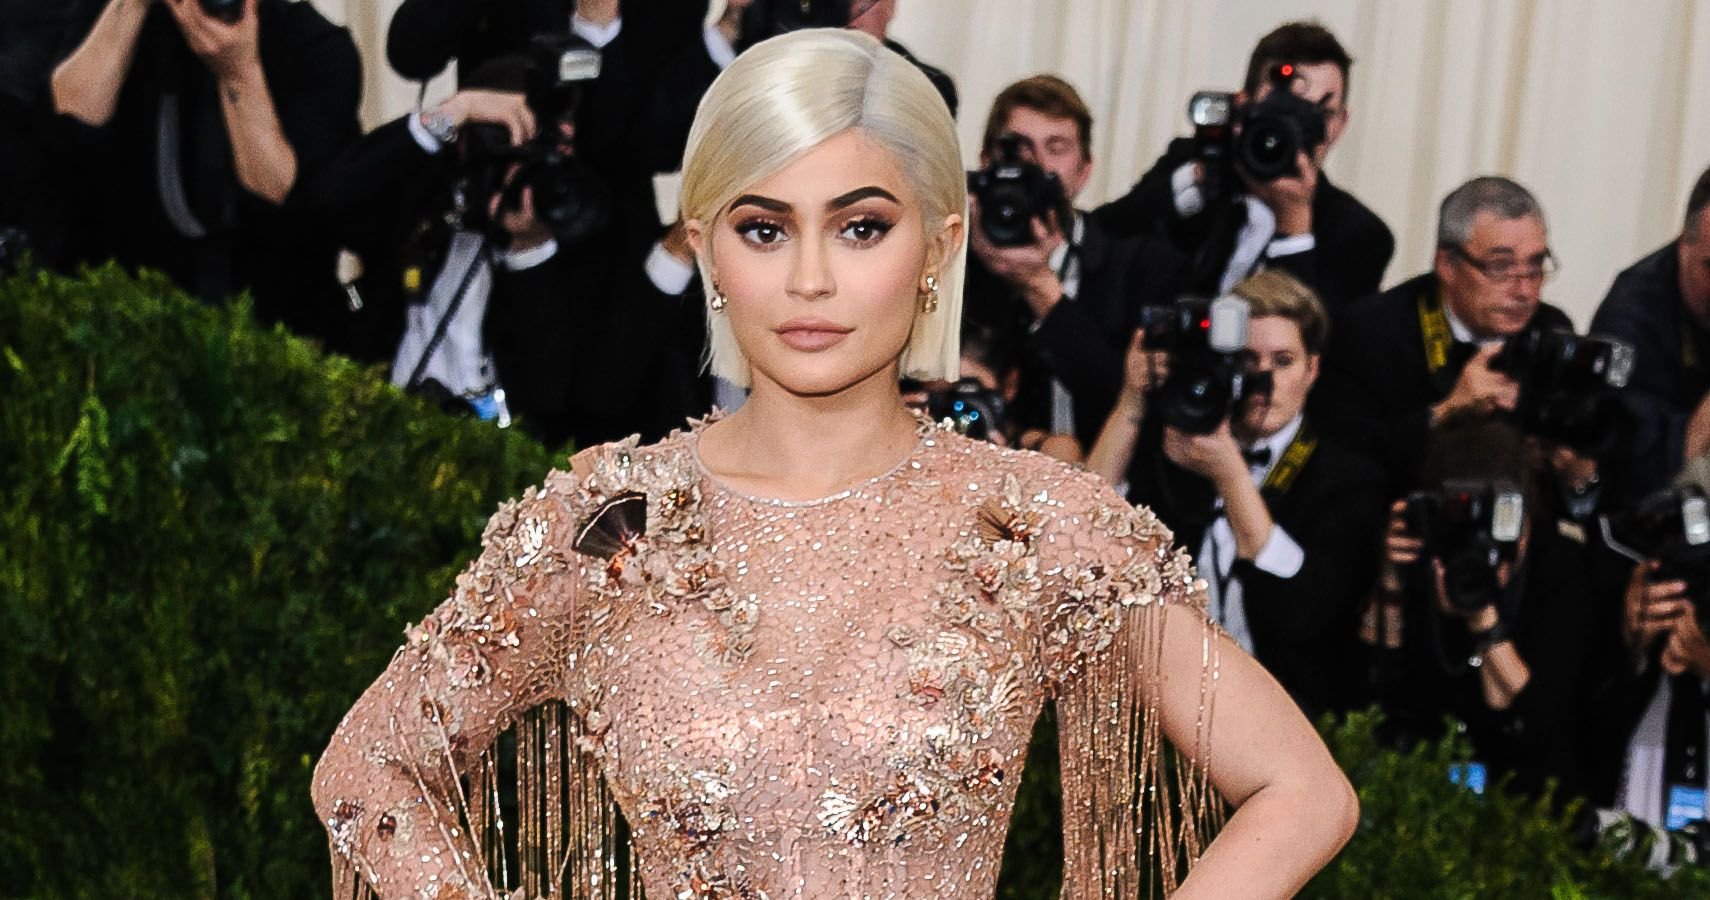 Kylie Jenner Prepares To Dominate Swimwear Sales With Her New Fashion Line